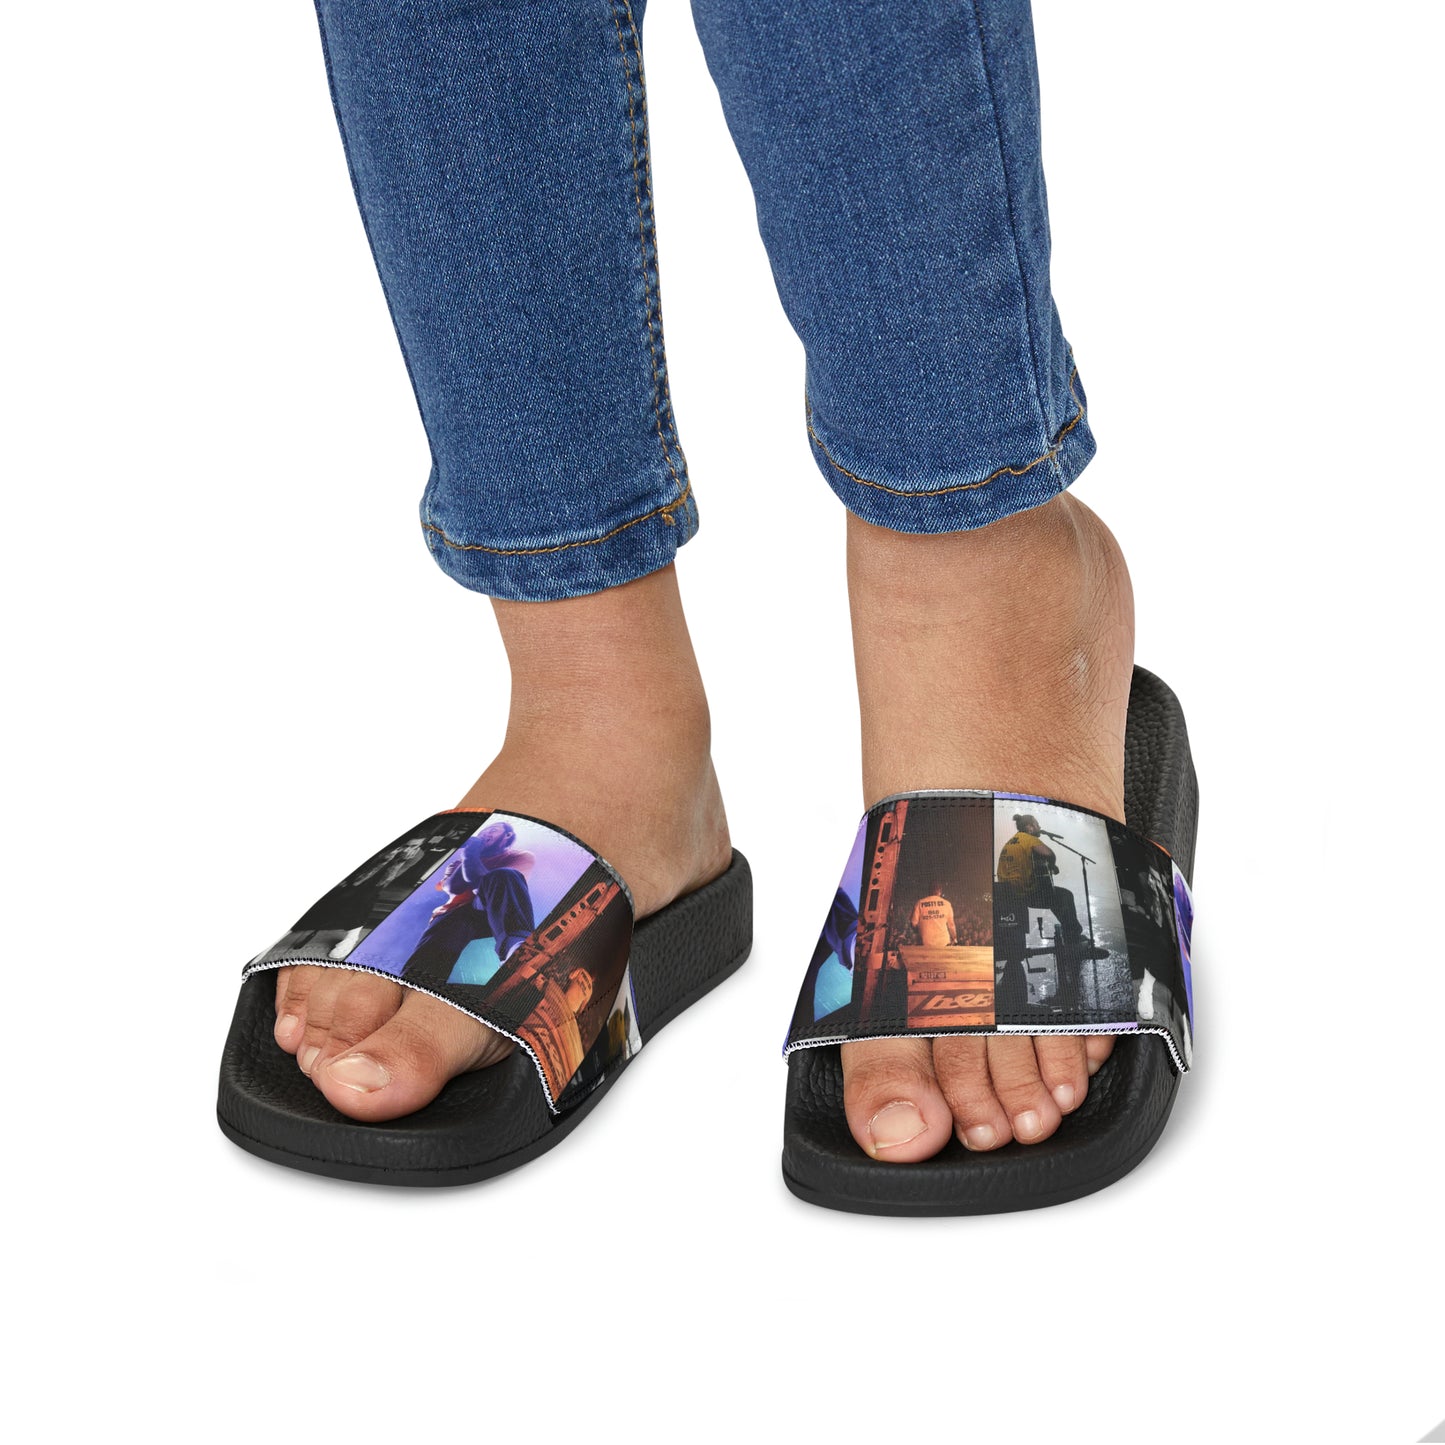 Post Malone On Tour Collage Youth Slide Sandals